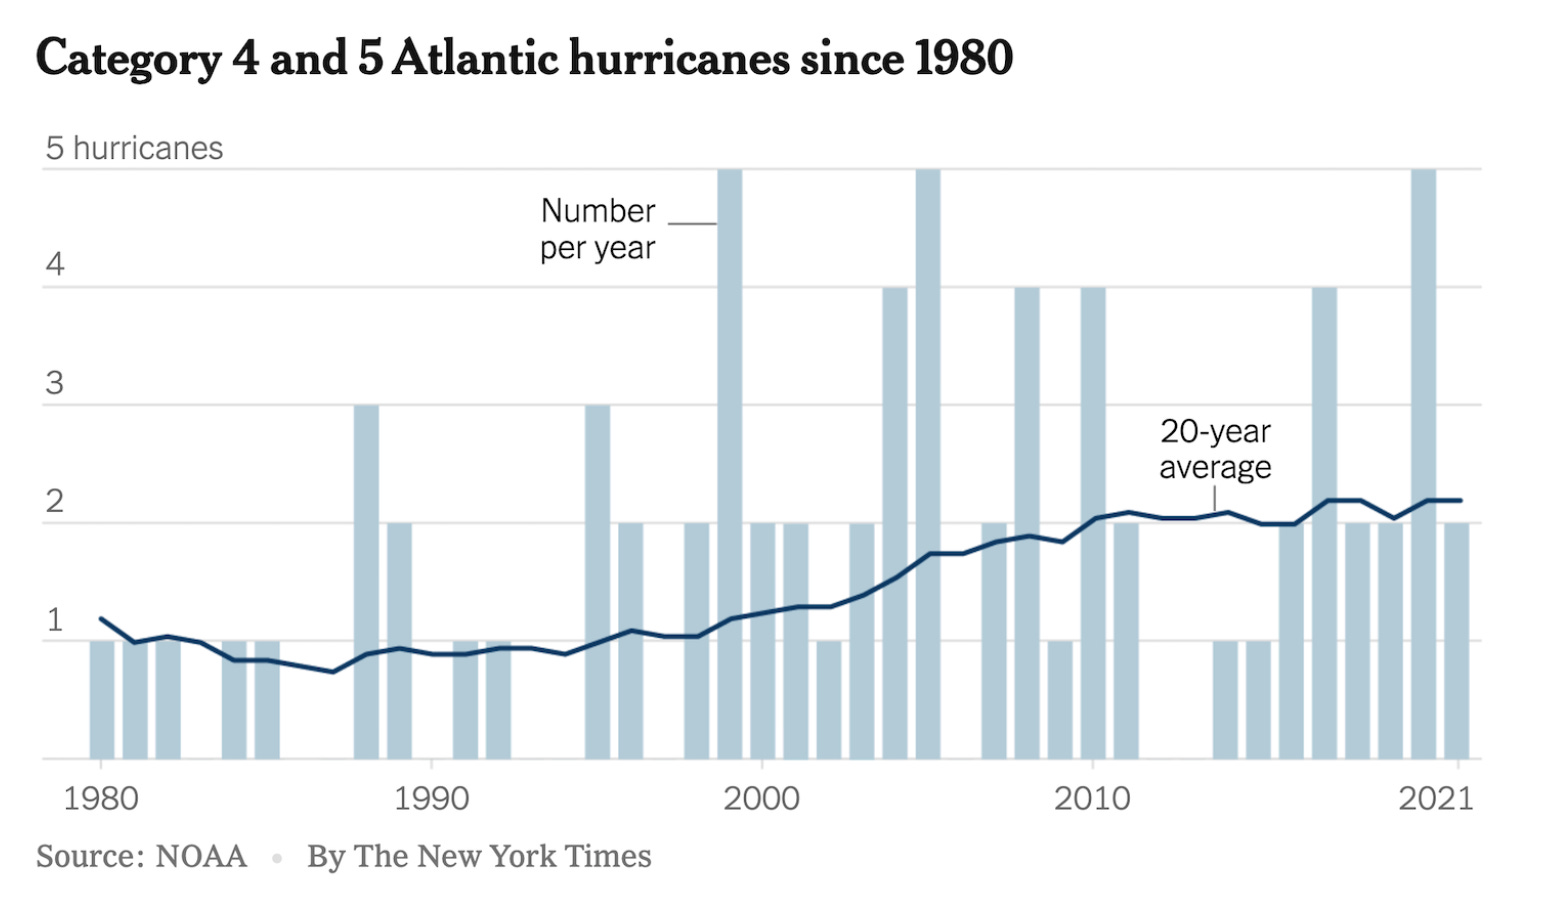 IMAGE 13 - Category 4 and 5 Atlantic hurricanes since 1980